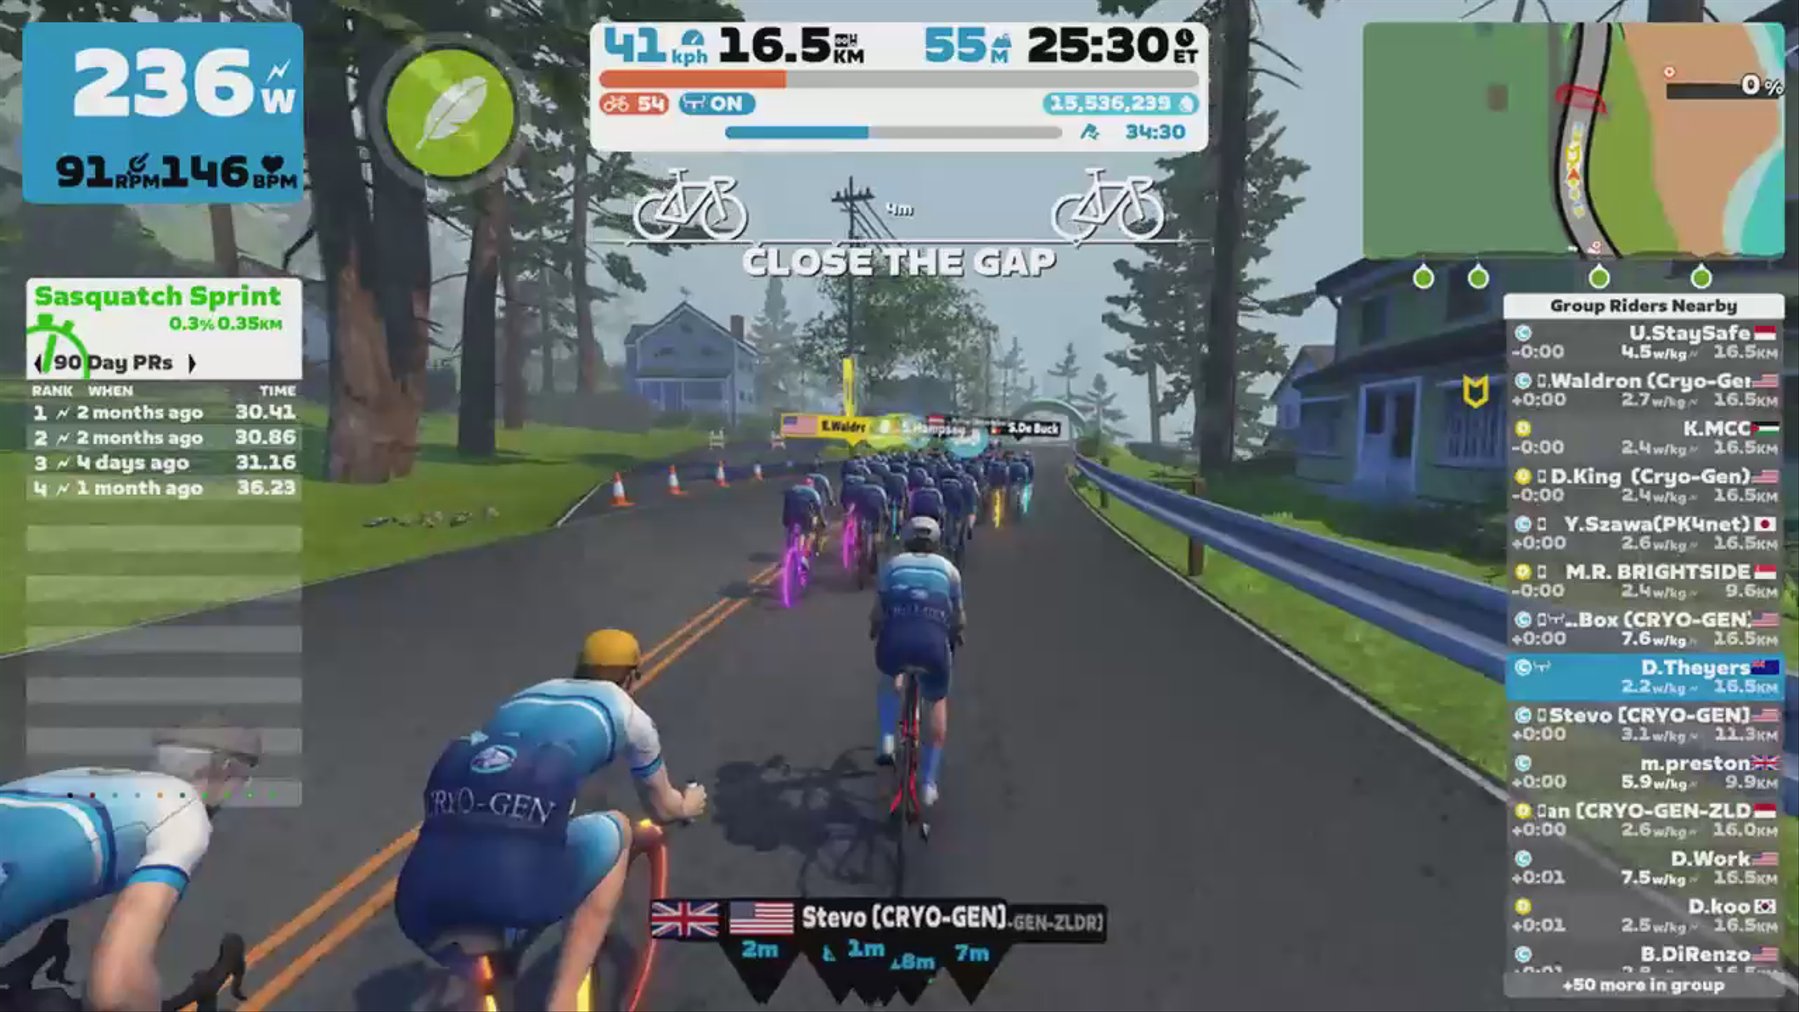 Zwift - Group Ride: CRYO-GEN Tempo Thursday Group Ride (C or D) (C) on Sugar Cookie in Watopia